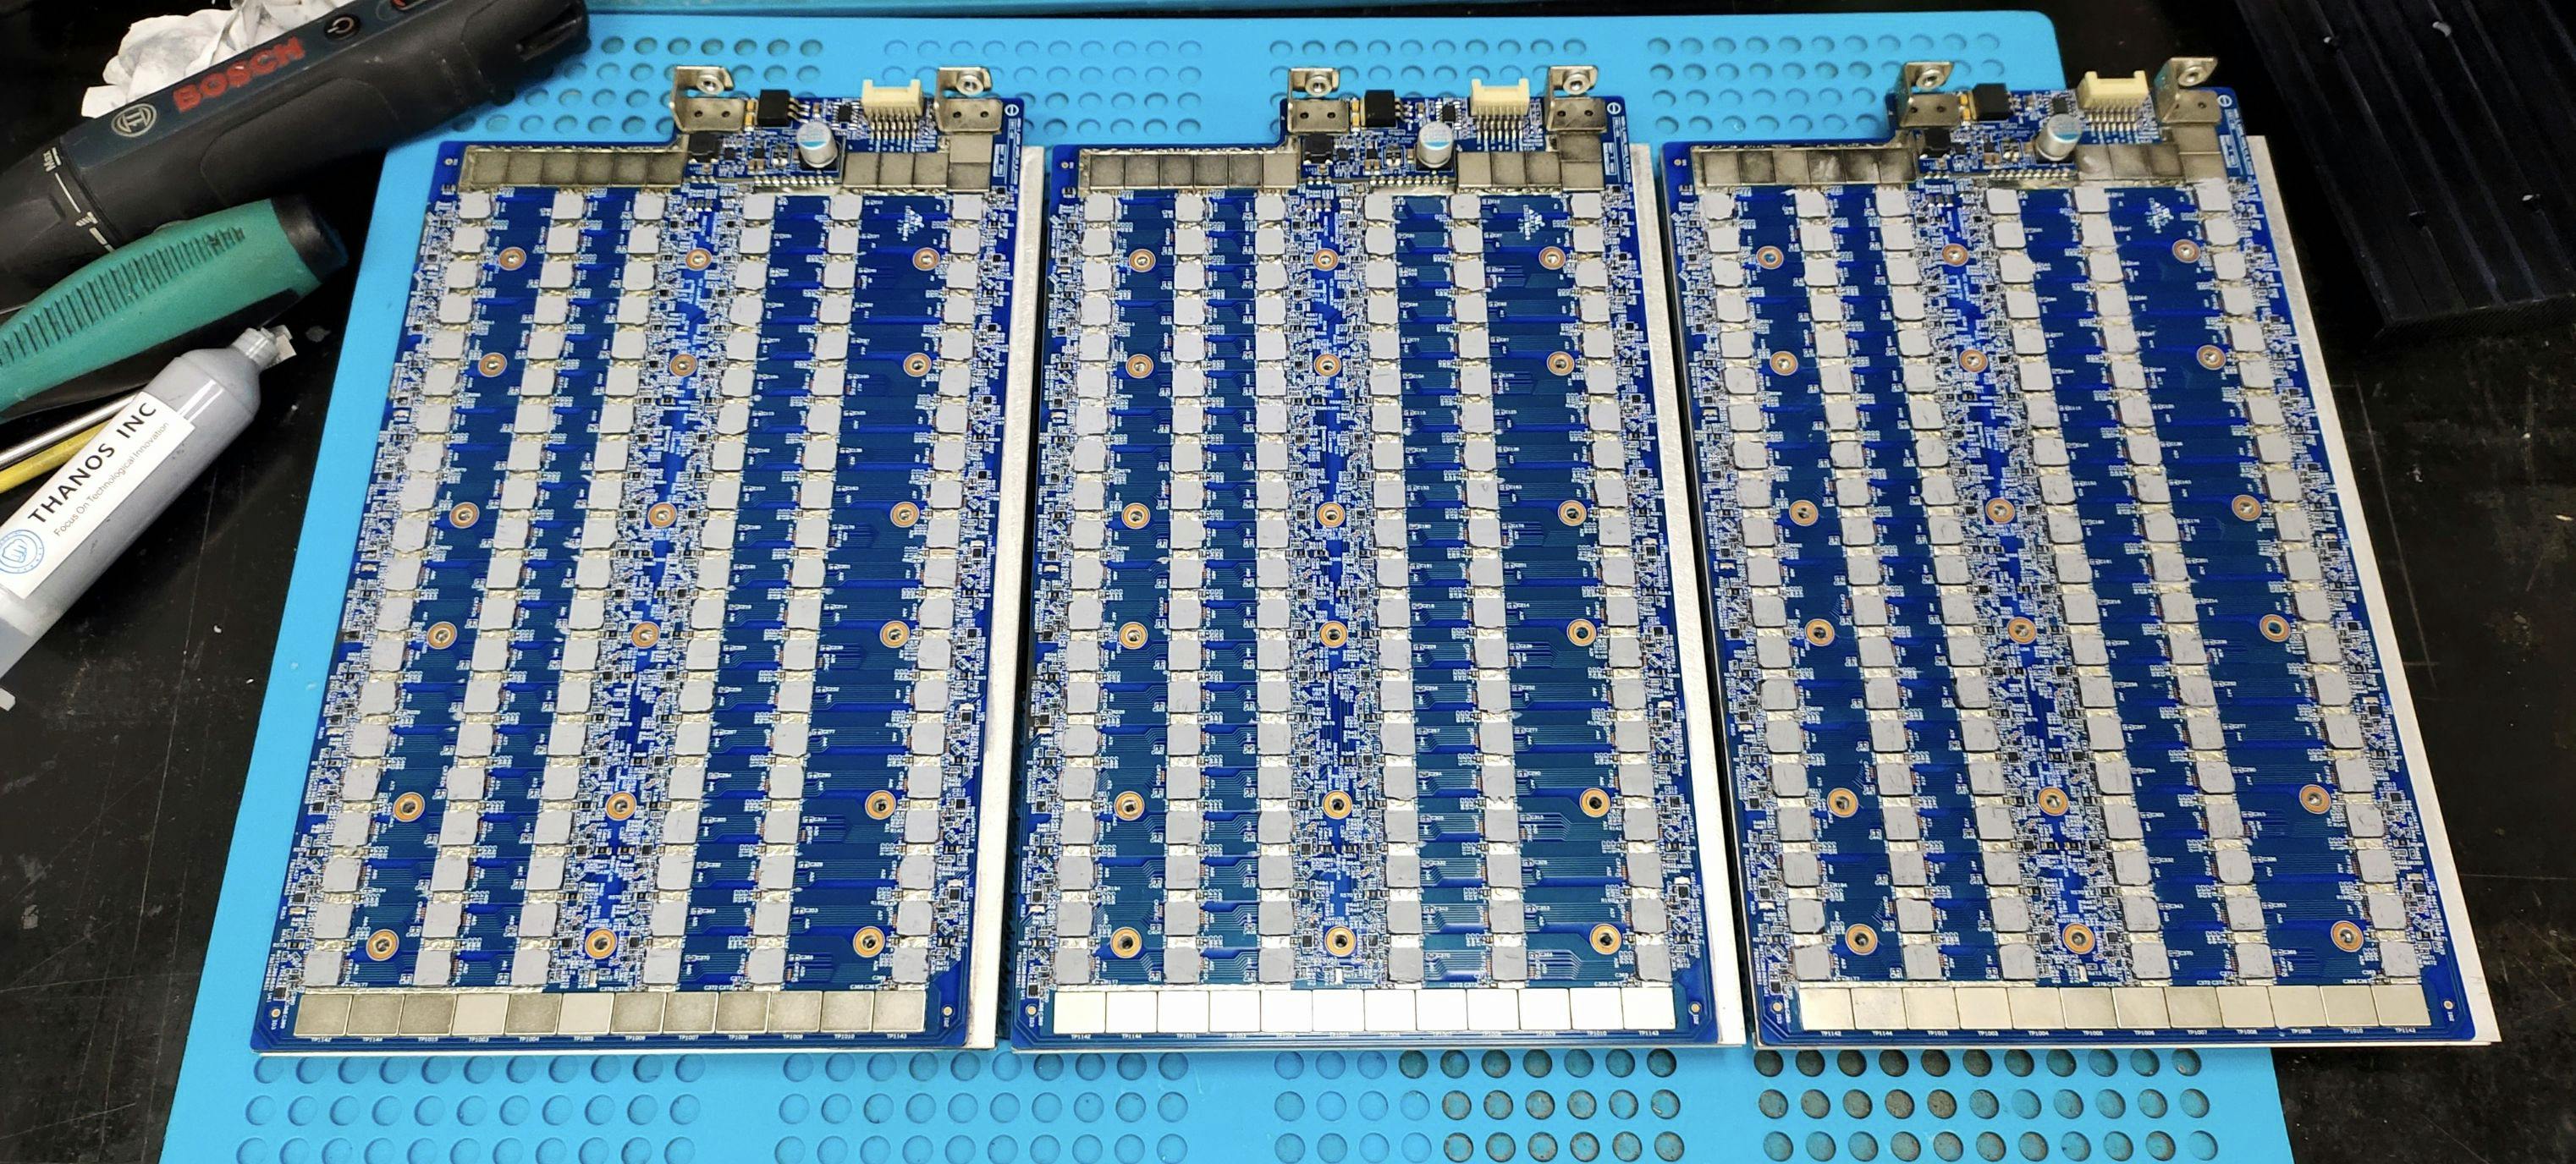 hashboard of Avalon 1246 without heat sink